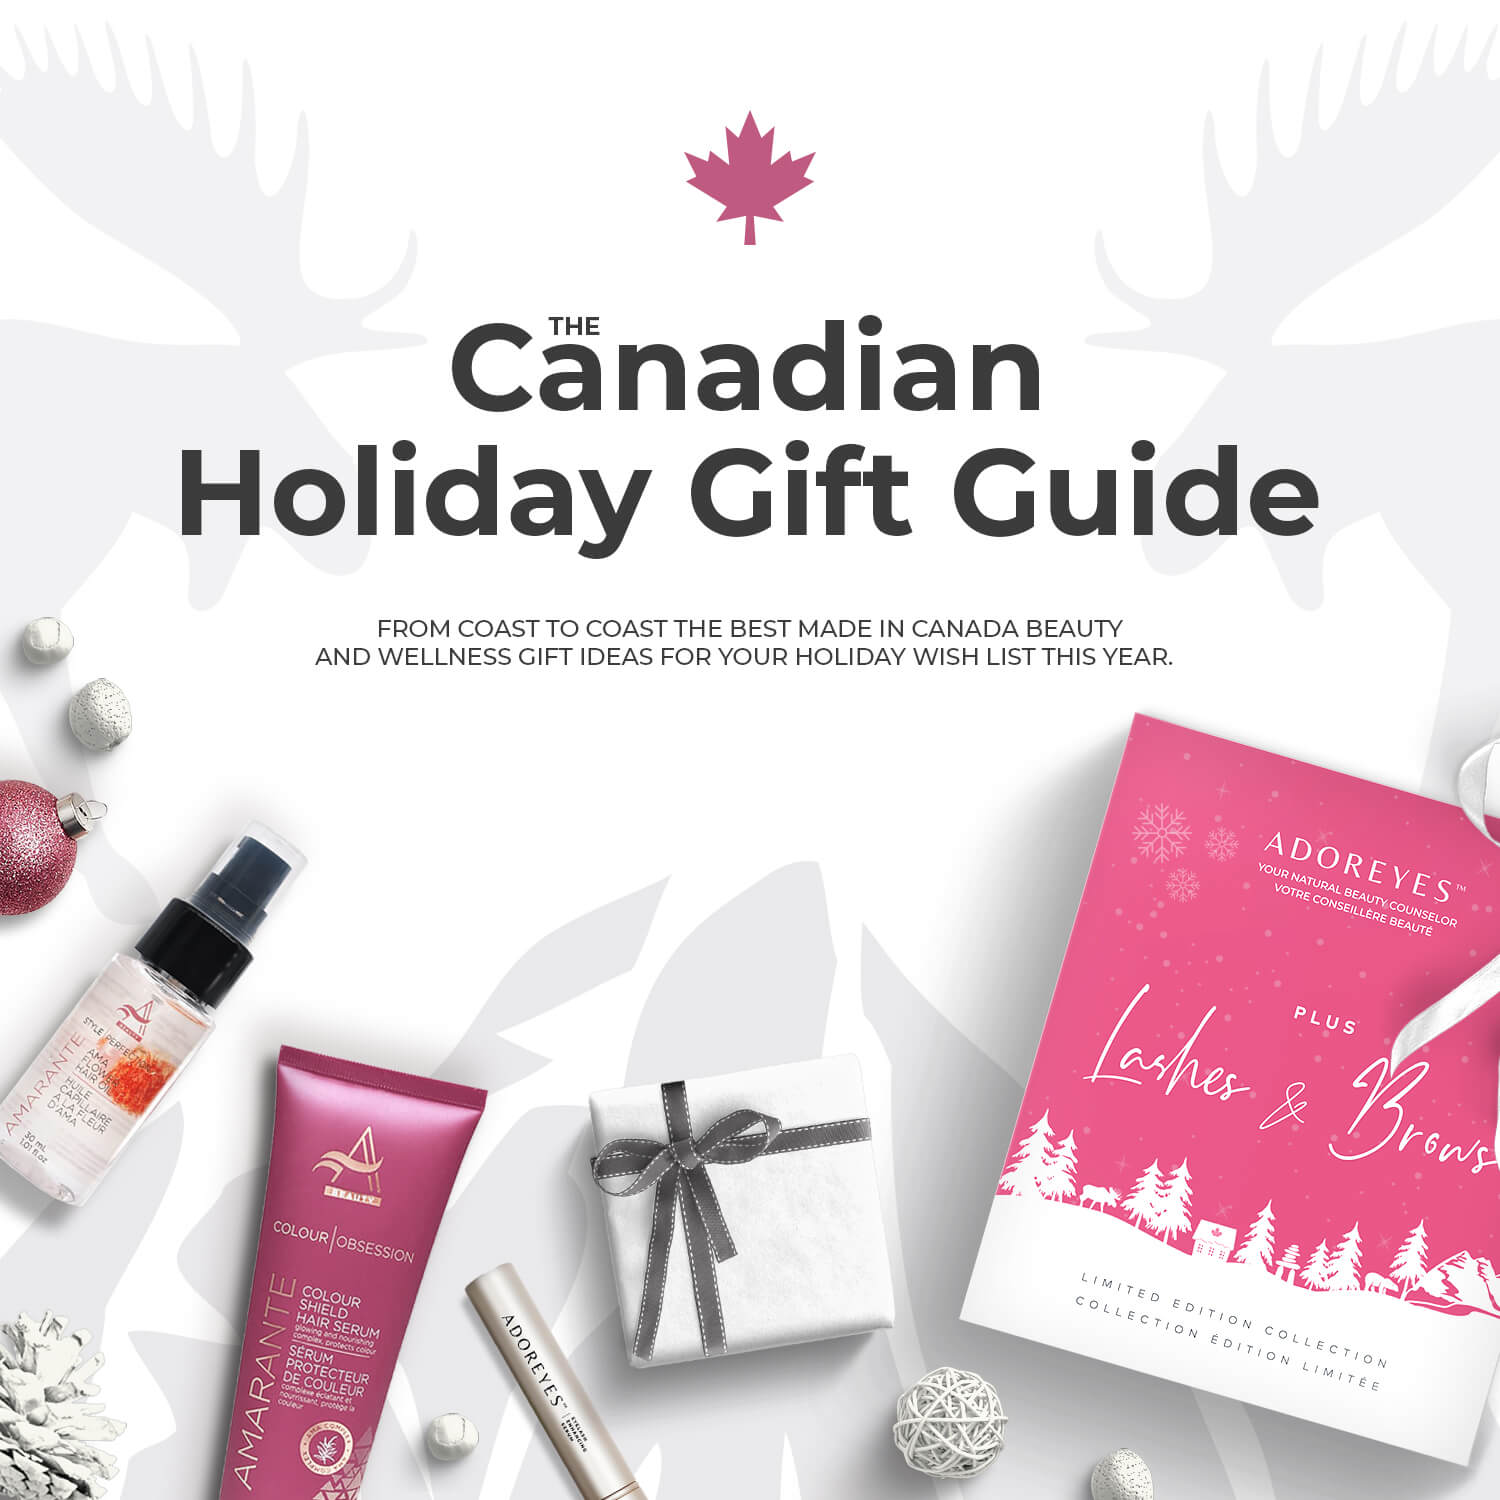 TRUE NORTH | Toronto Gift Boxes & Gift Baskets – Present Day